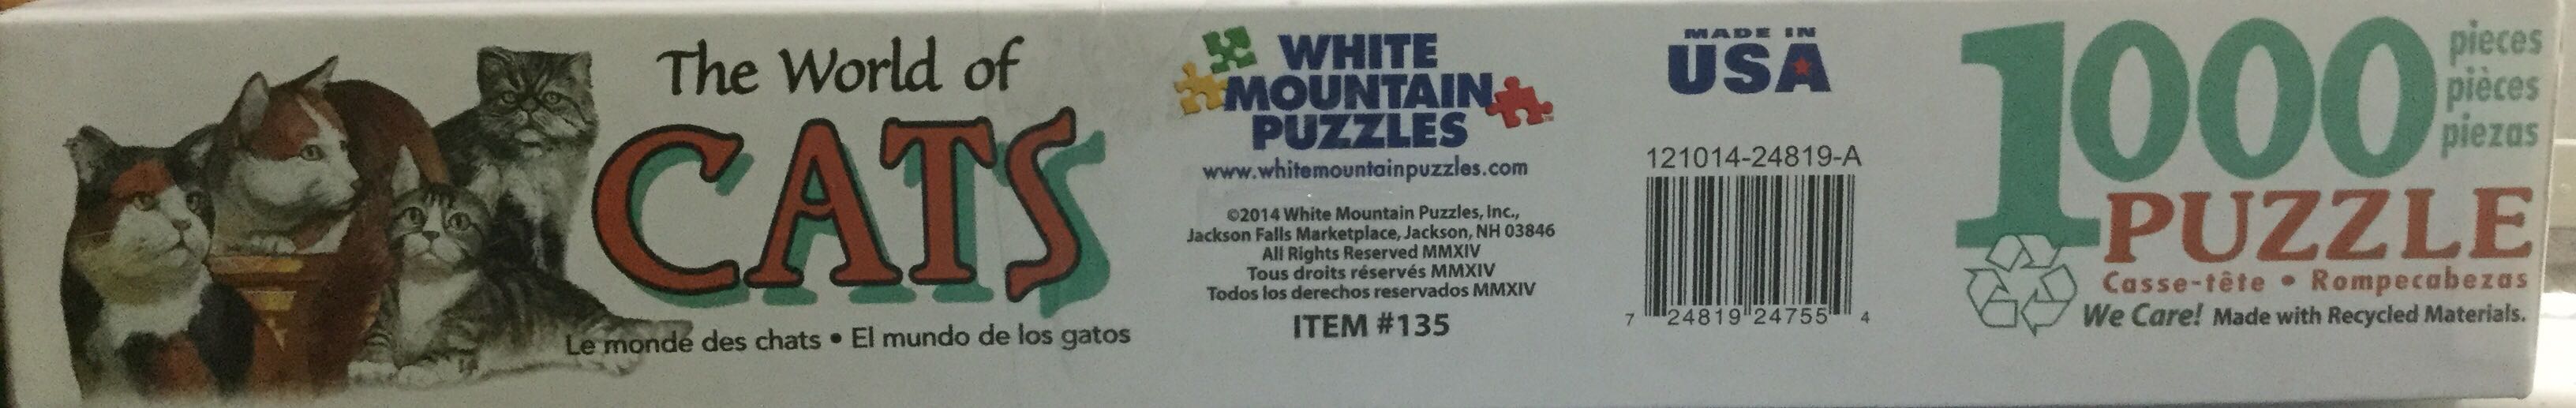 The World Of Cats - White Mountain puzzle collectible [Barcode 724819247554] - Main Image 4